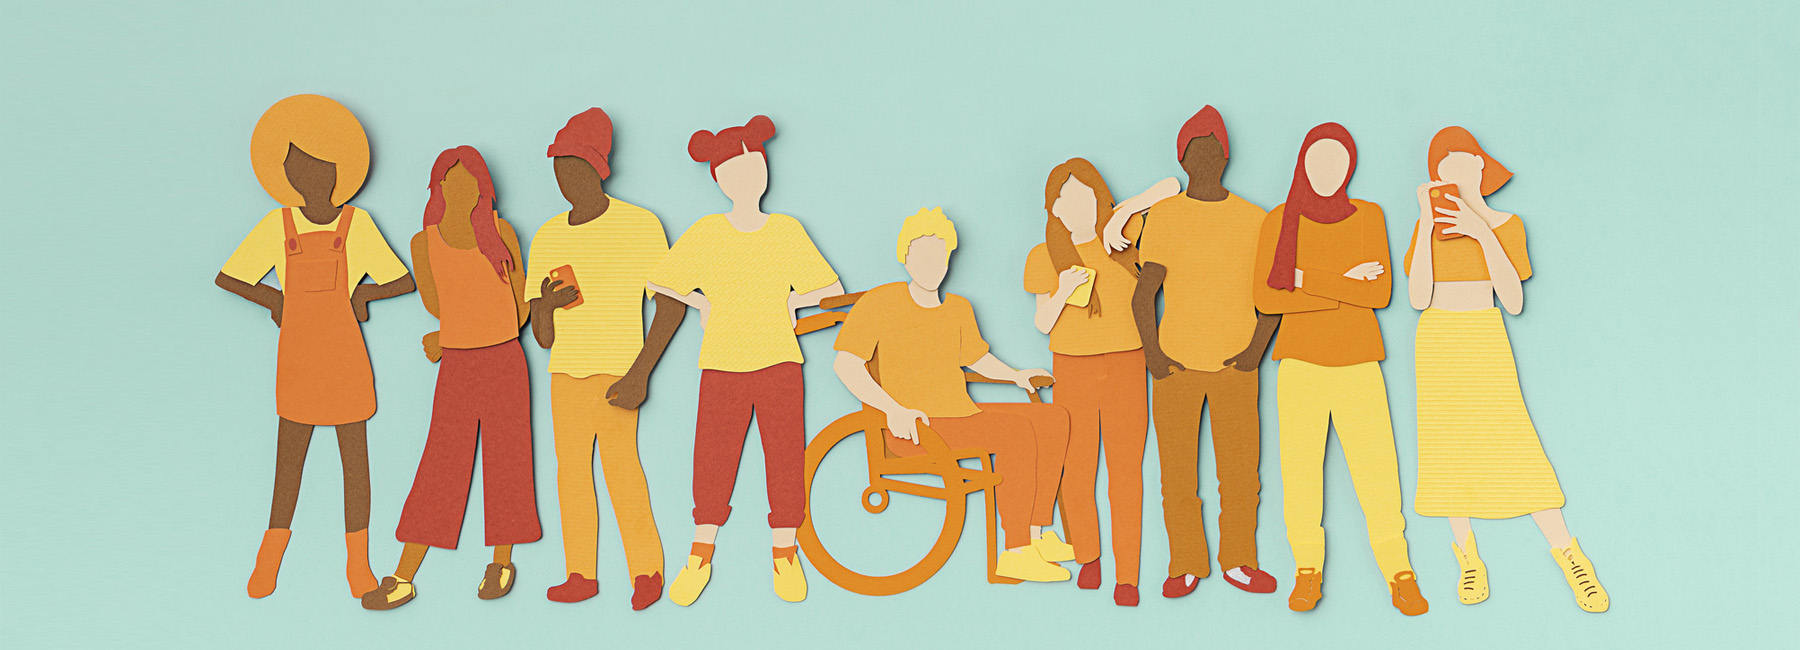 Drawing of a diverse group of young people